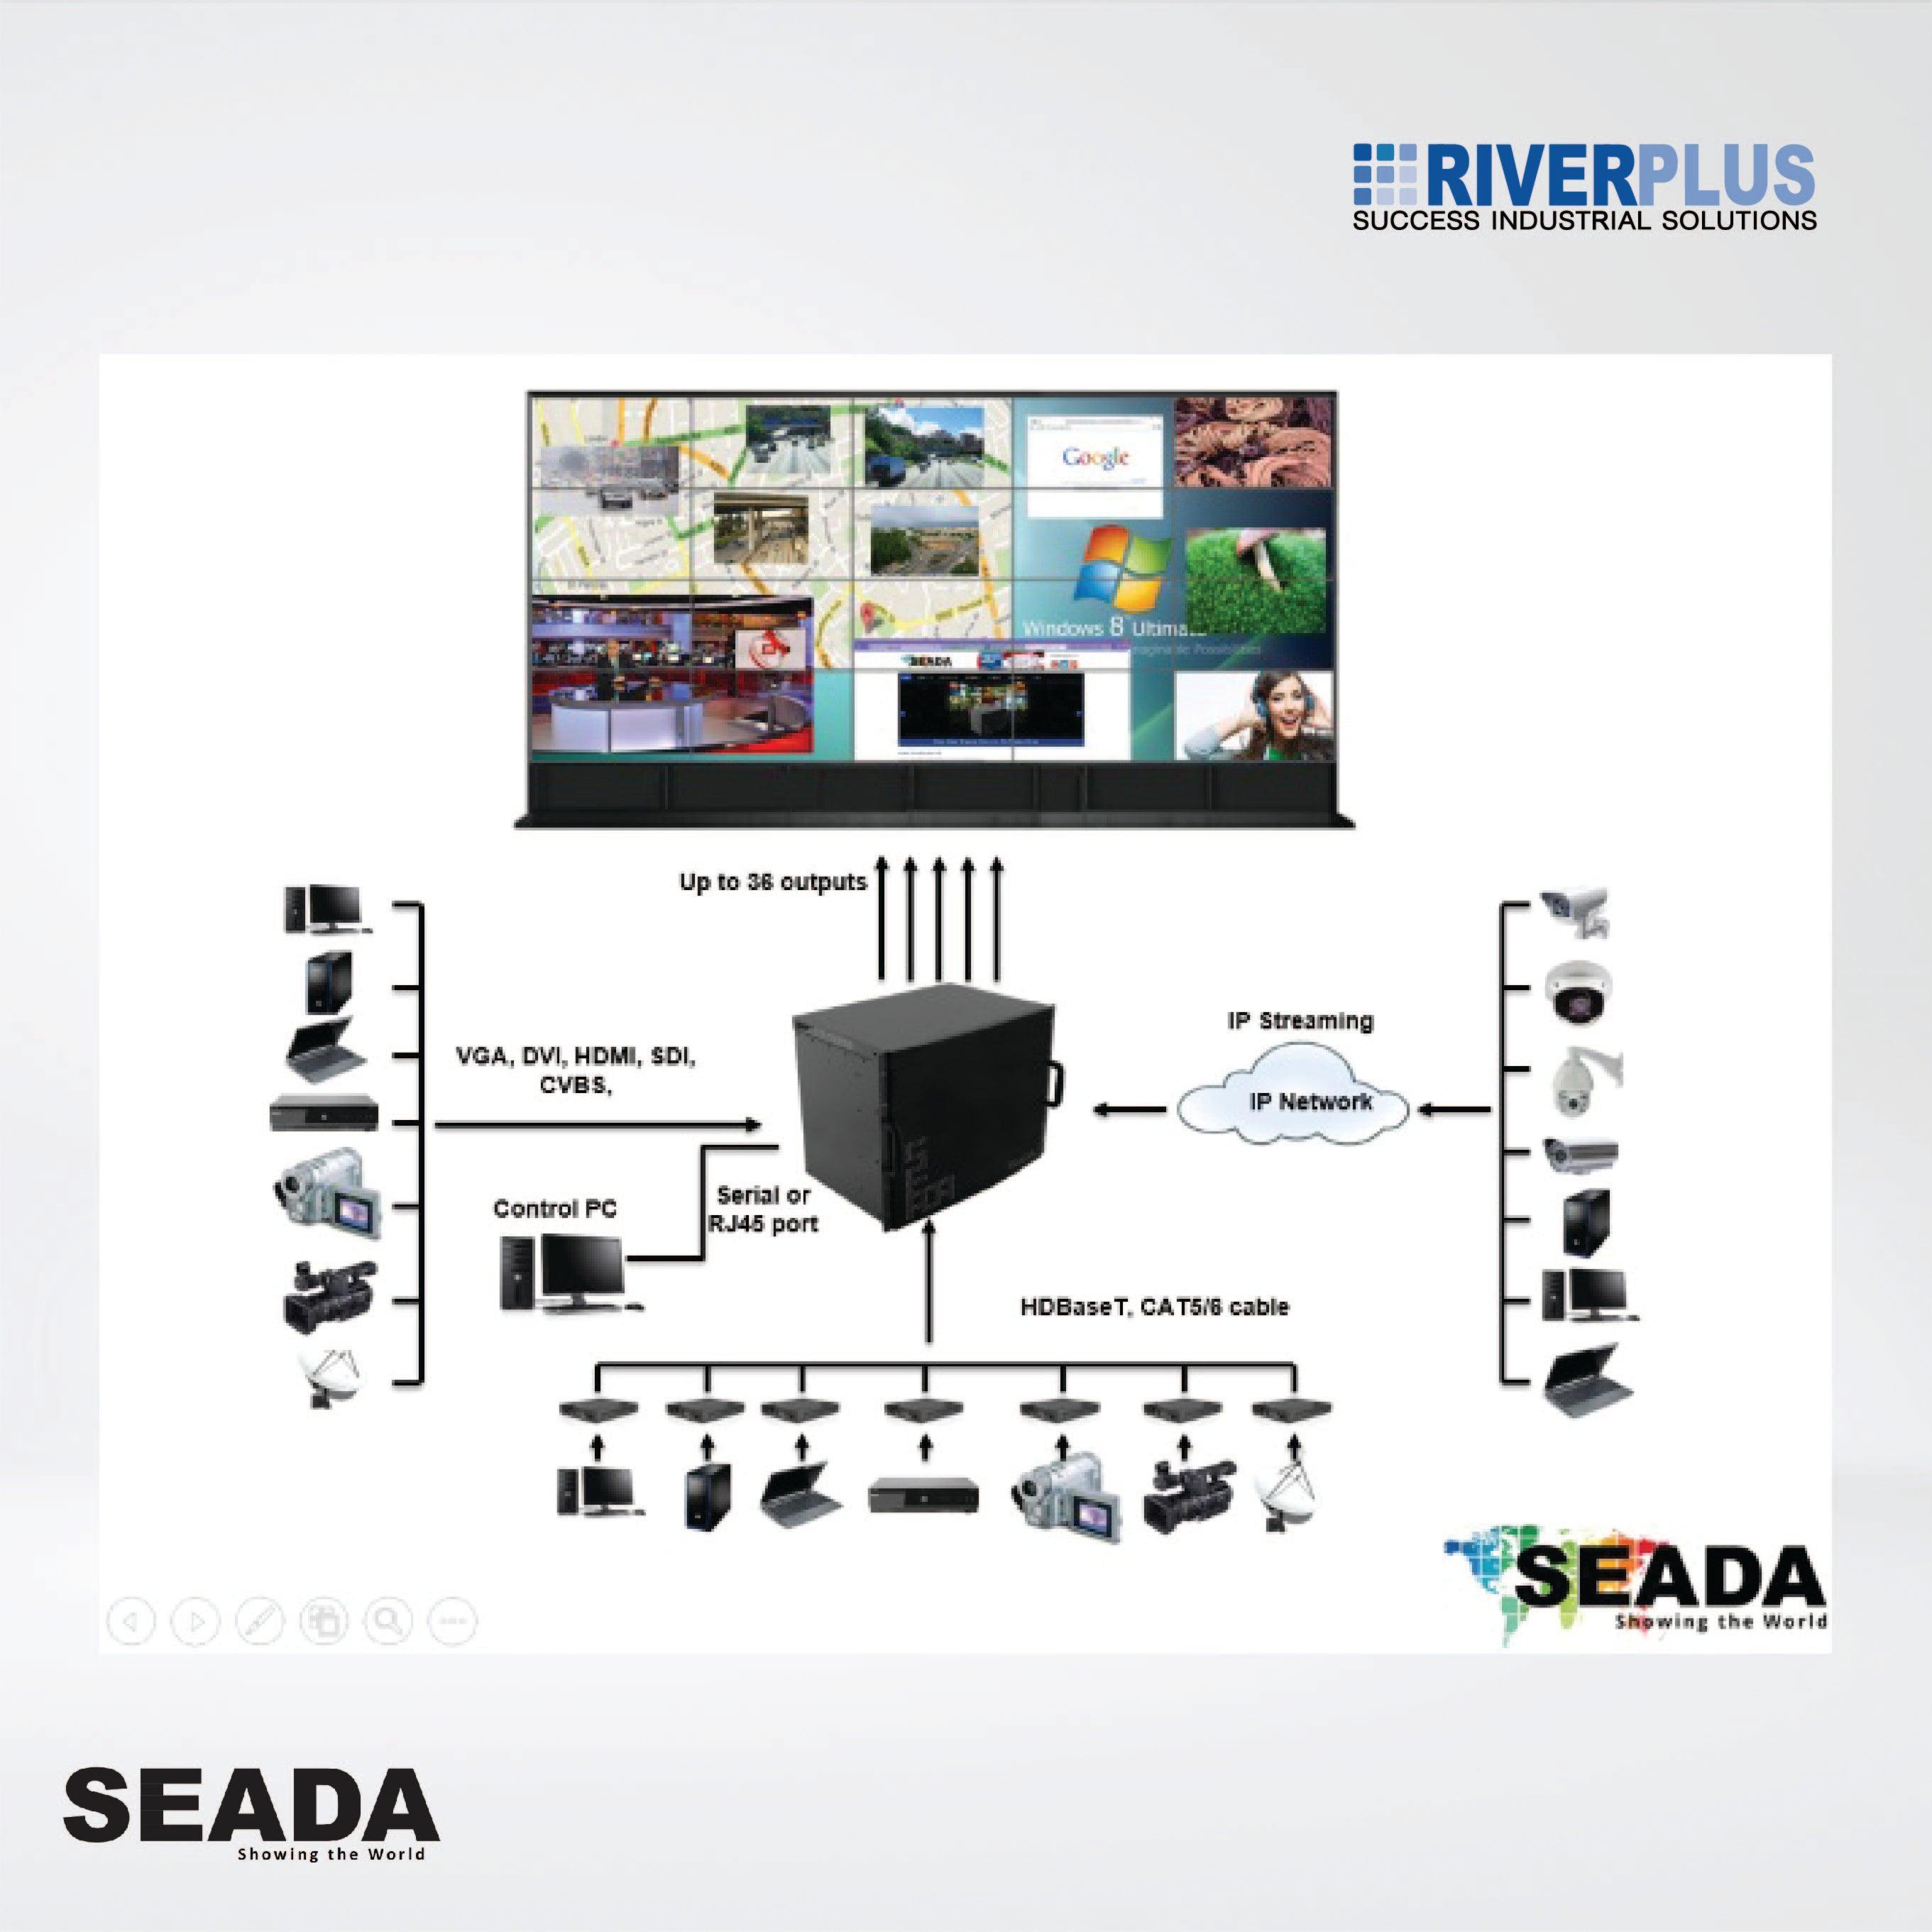 SW2036 Medium to large size video wall ,36 display outputs /Able to capture maximum 32 HD video inputs - Riverplus